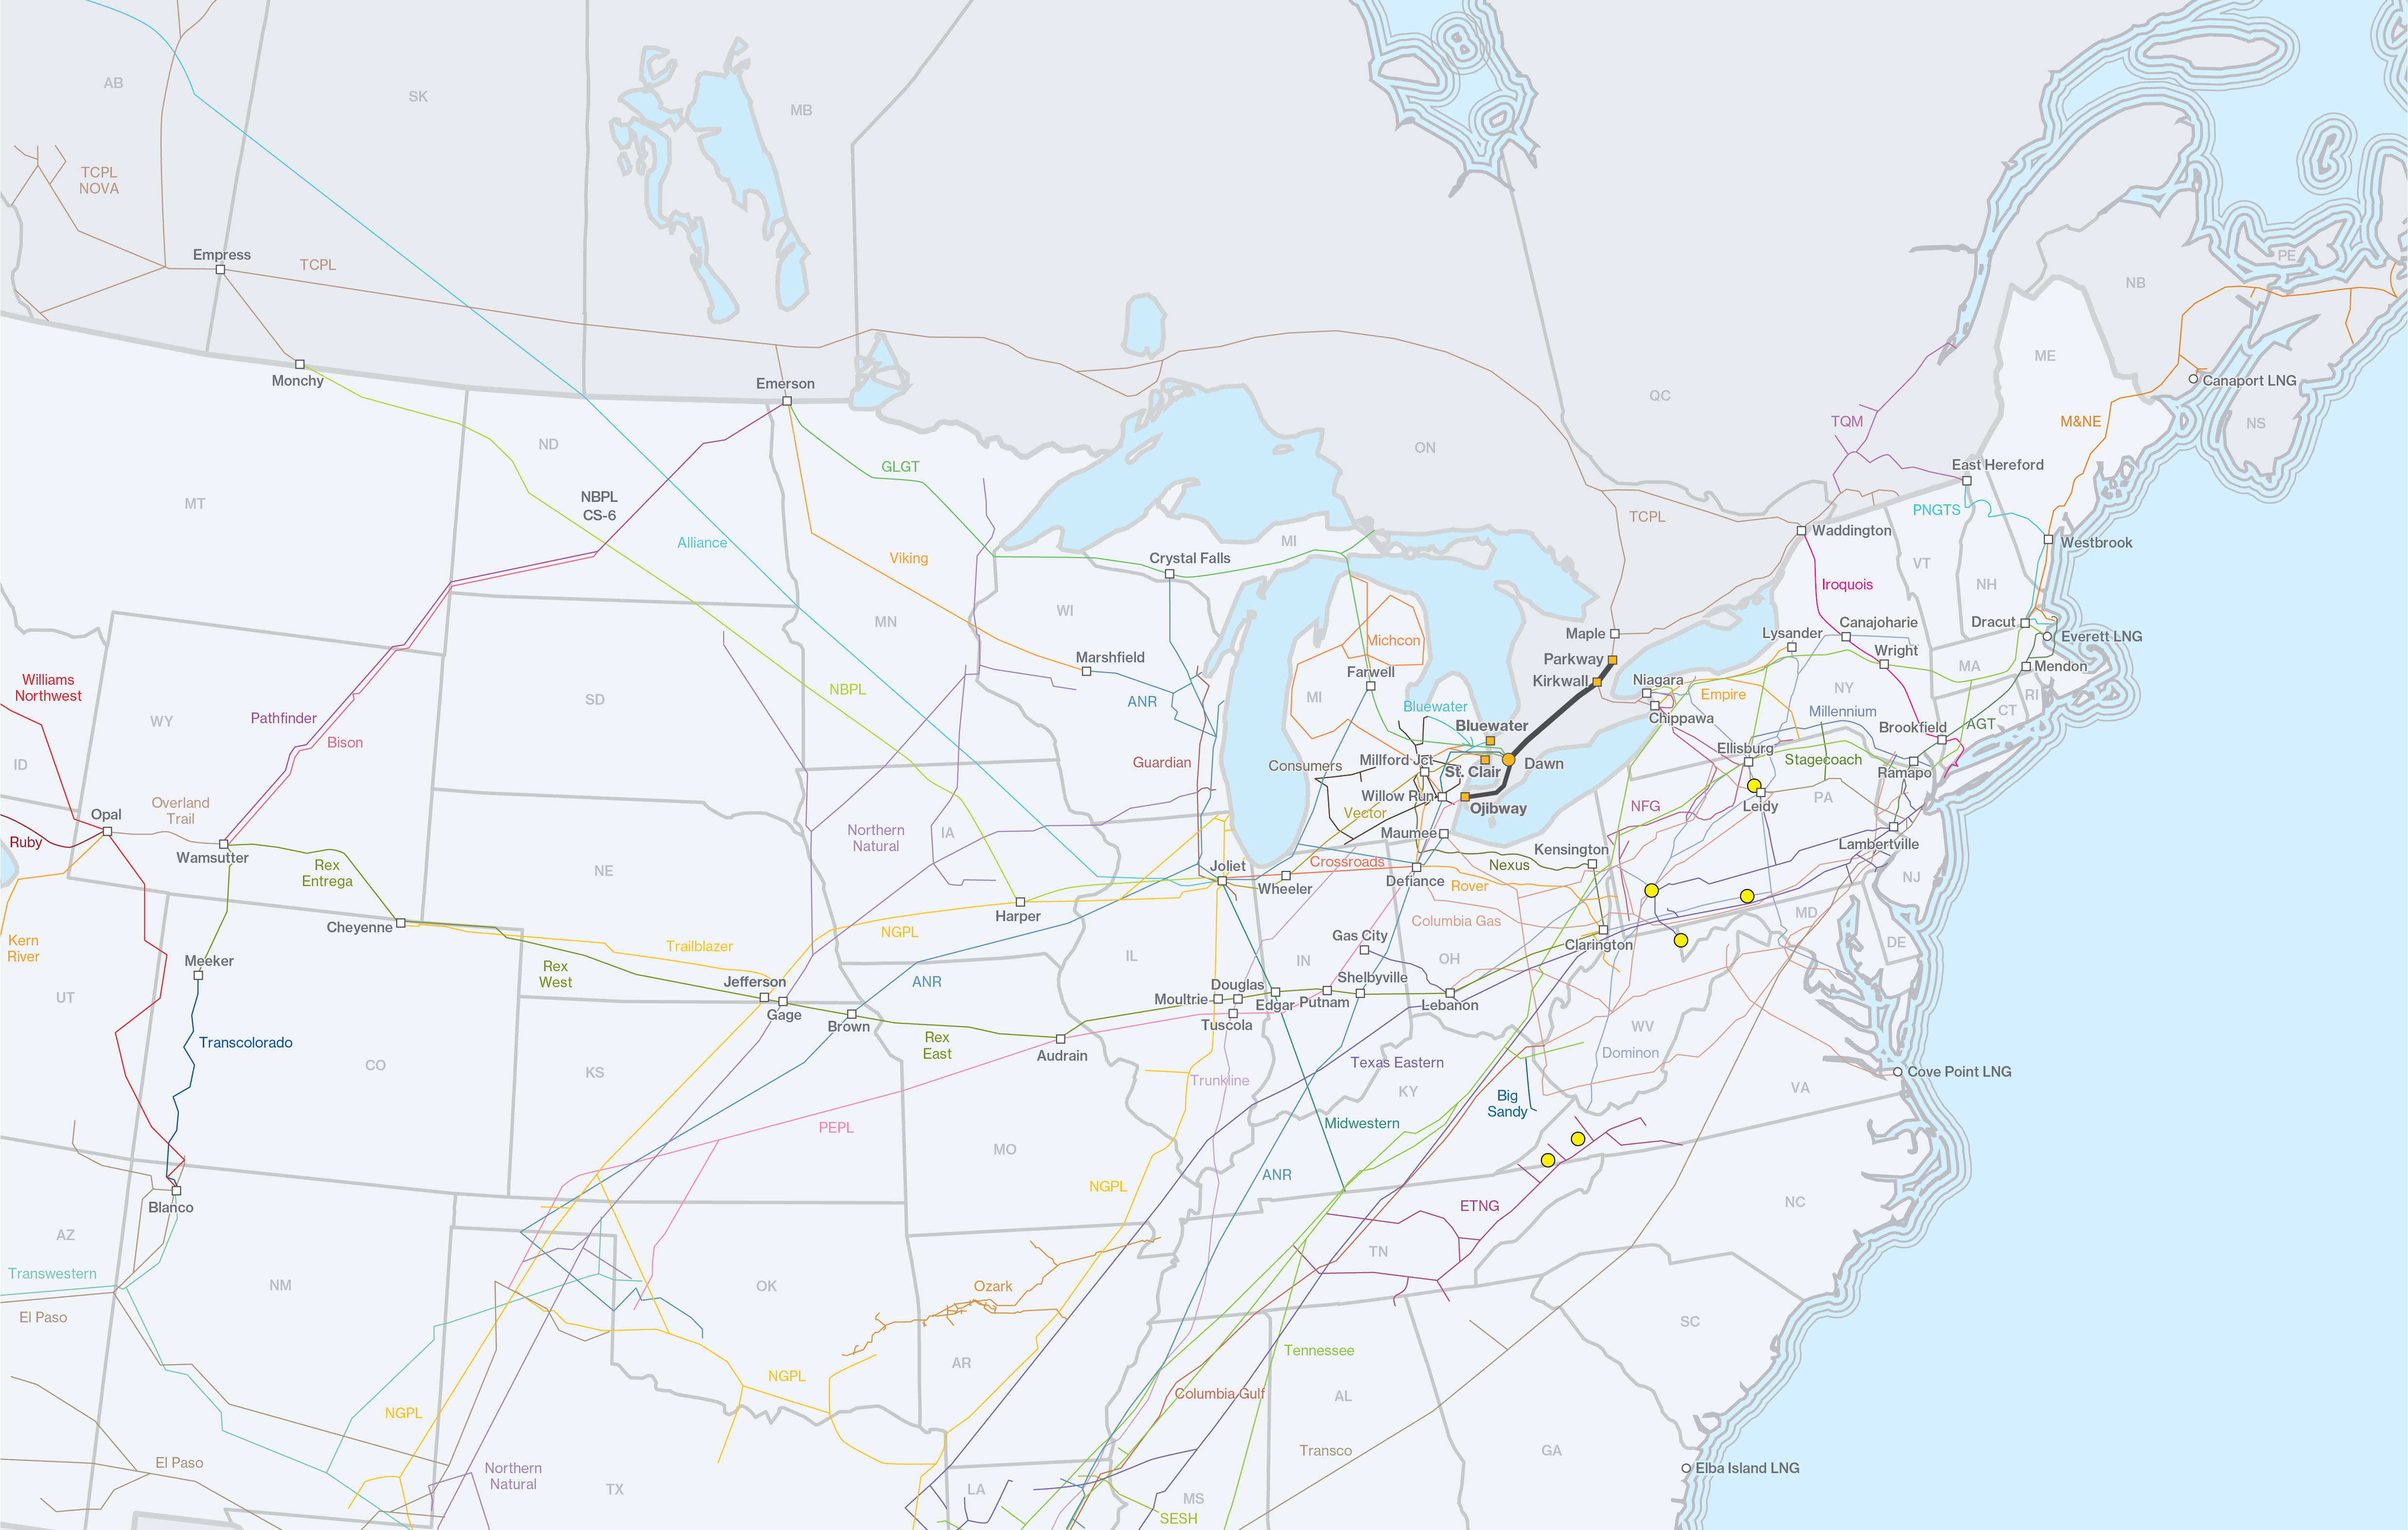 North American Natural Gas Pipeline map